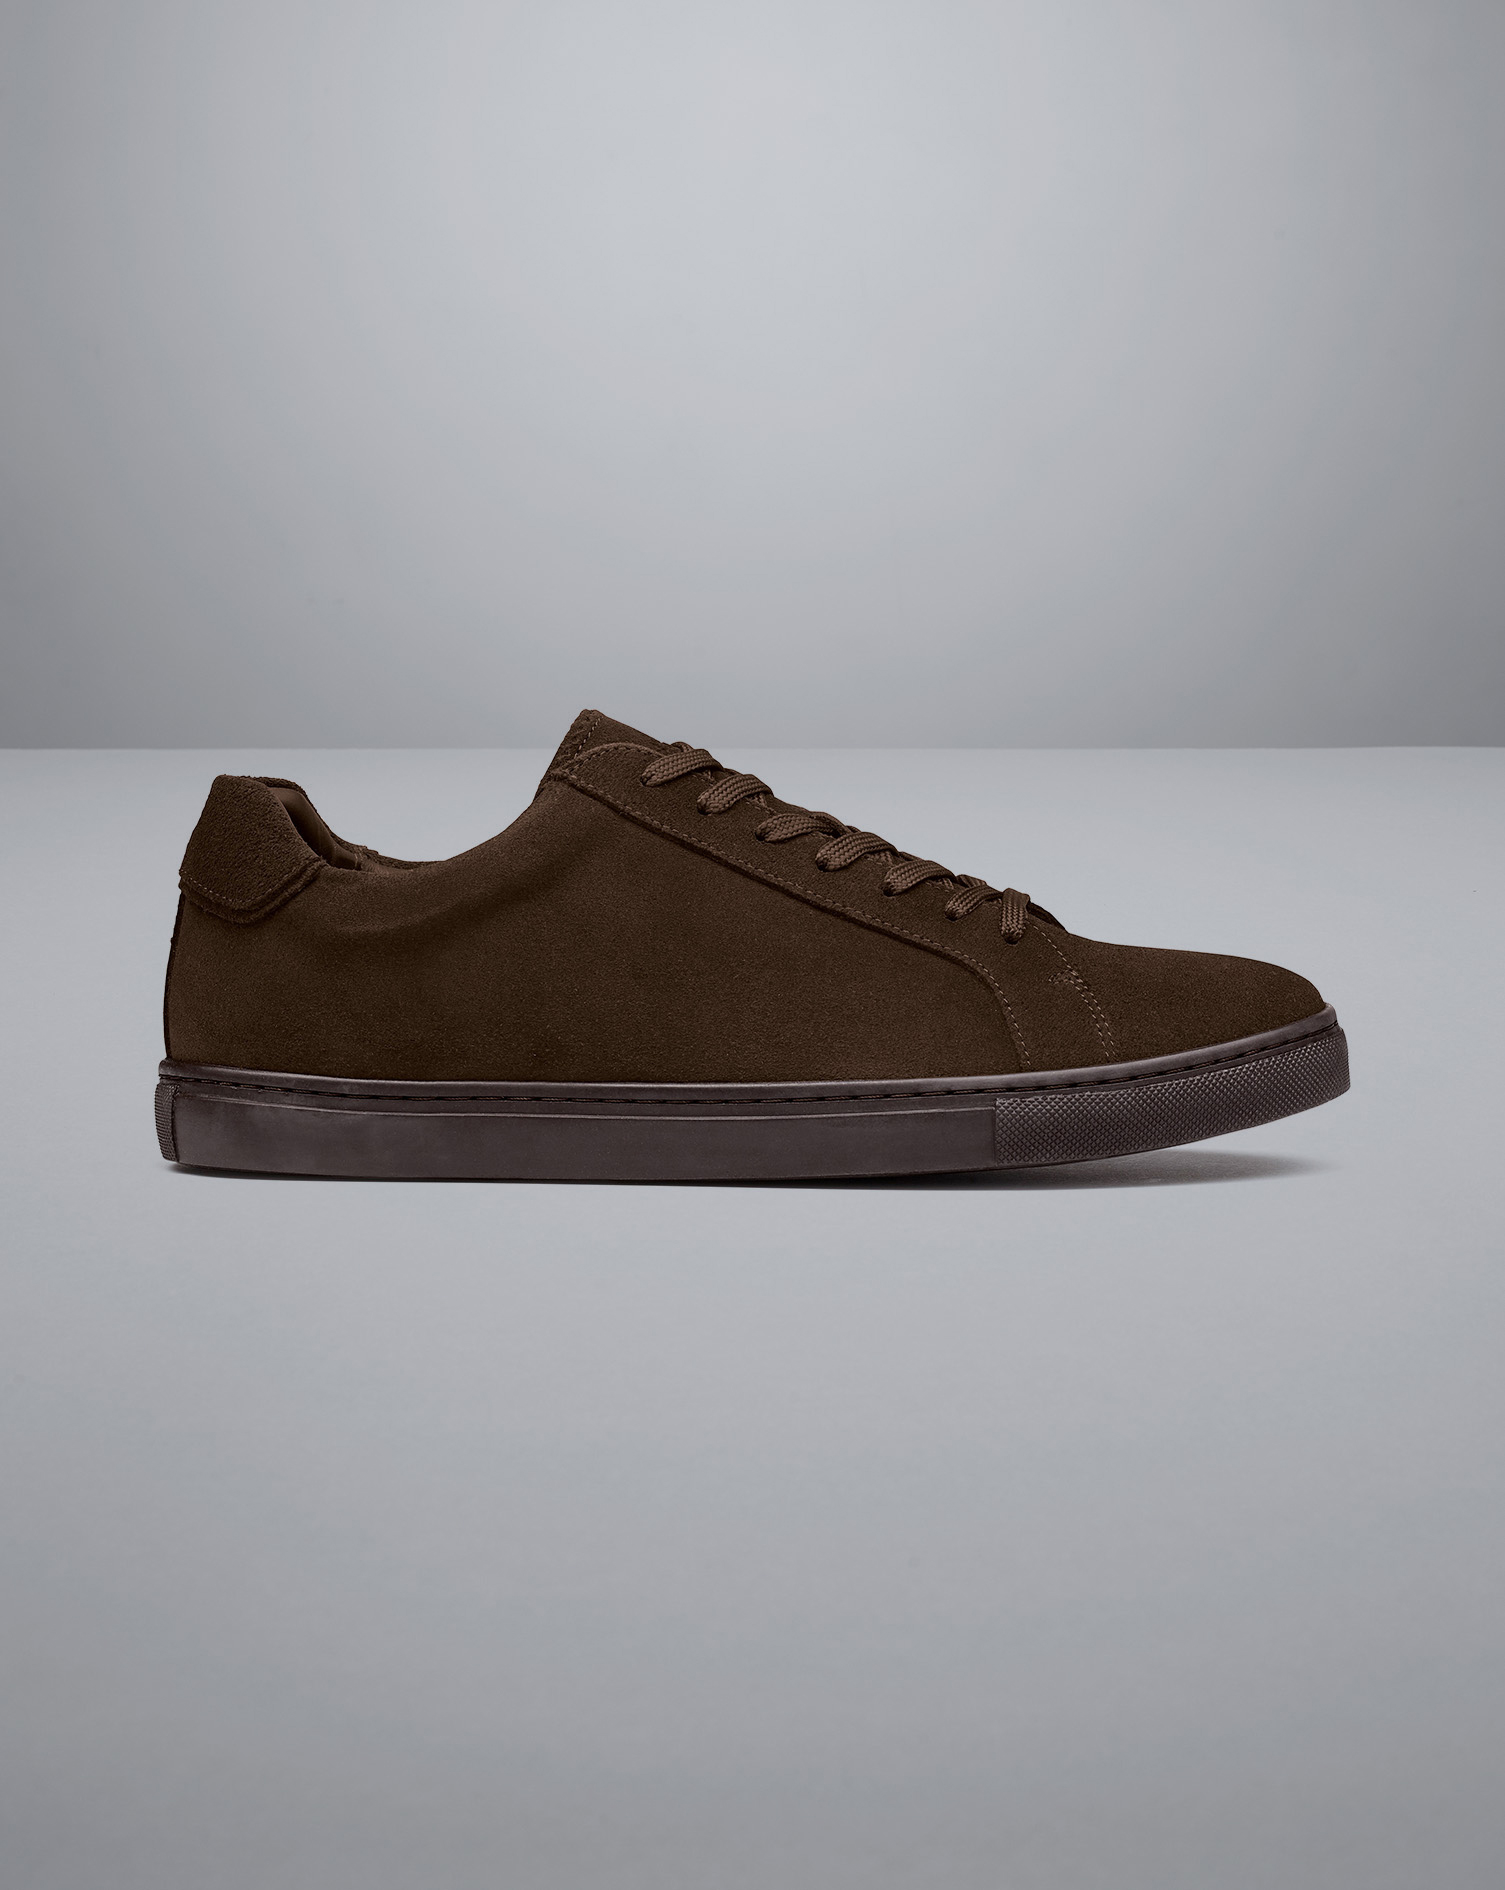 Men's Suede Trainers - Chocolate Brown, 9 R by Charles Tyrwhitt